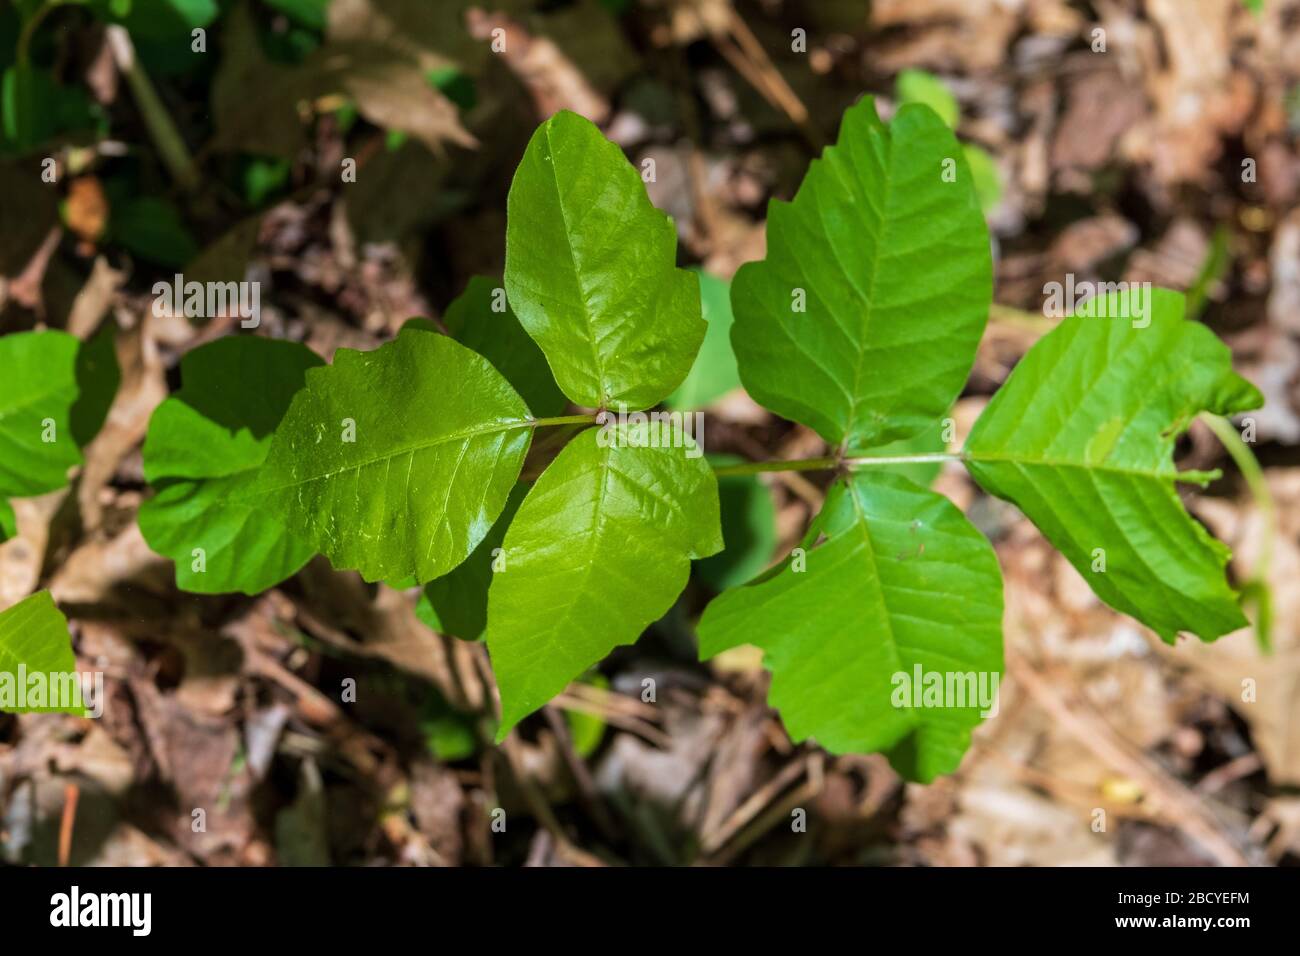 Poisn ivy - leaves of three let it be. Top view of plant from top view. Stock Photo